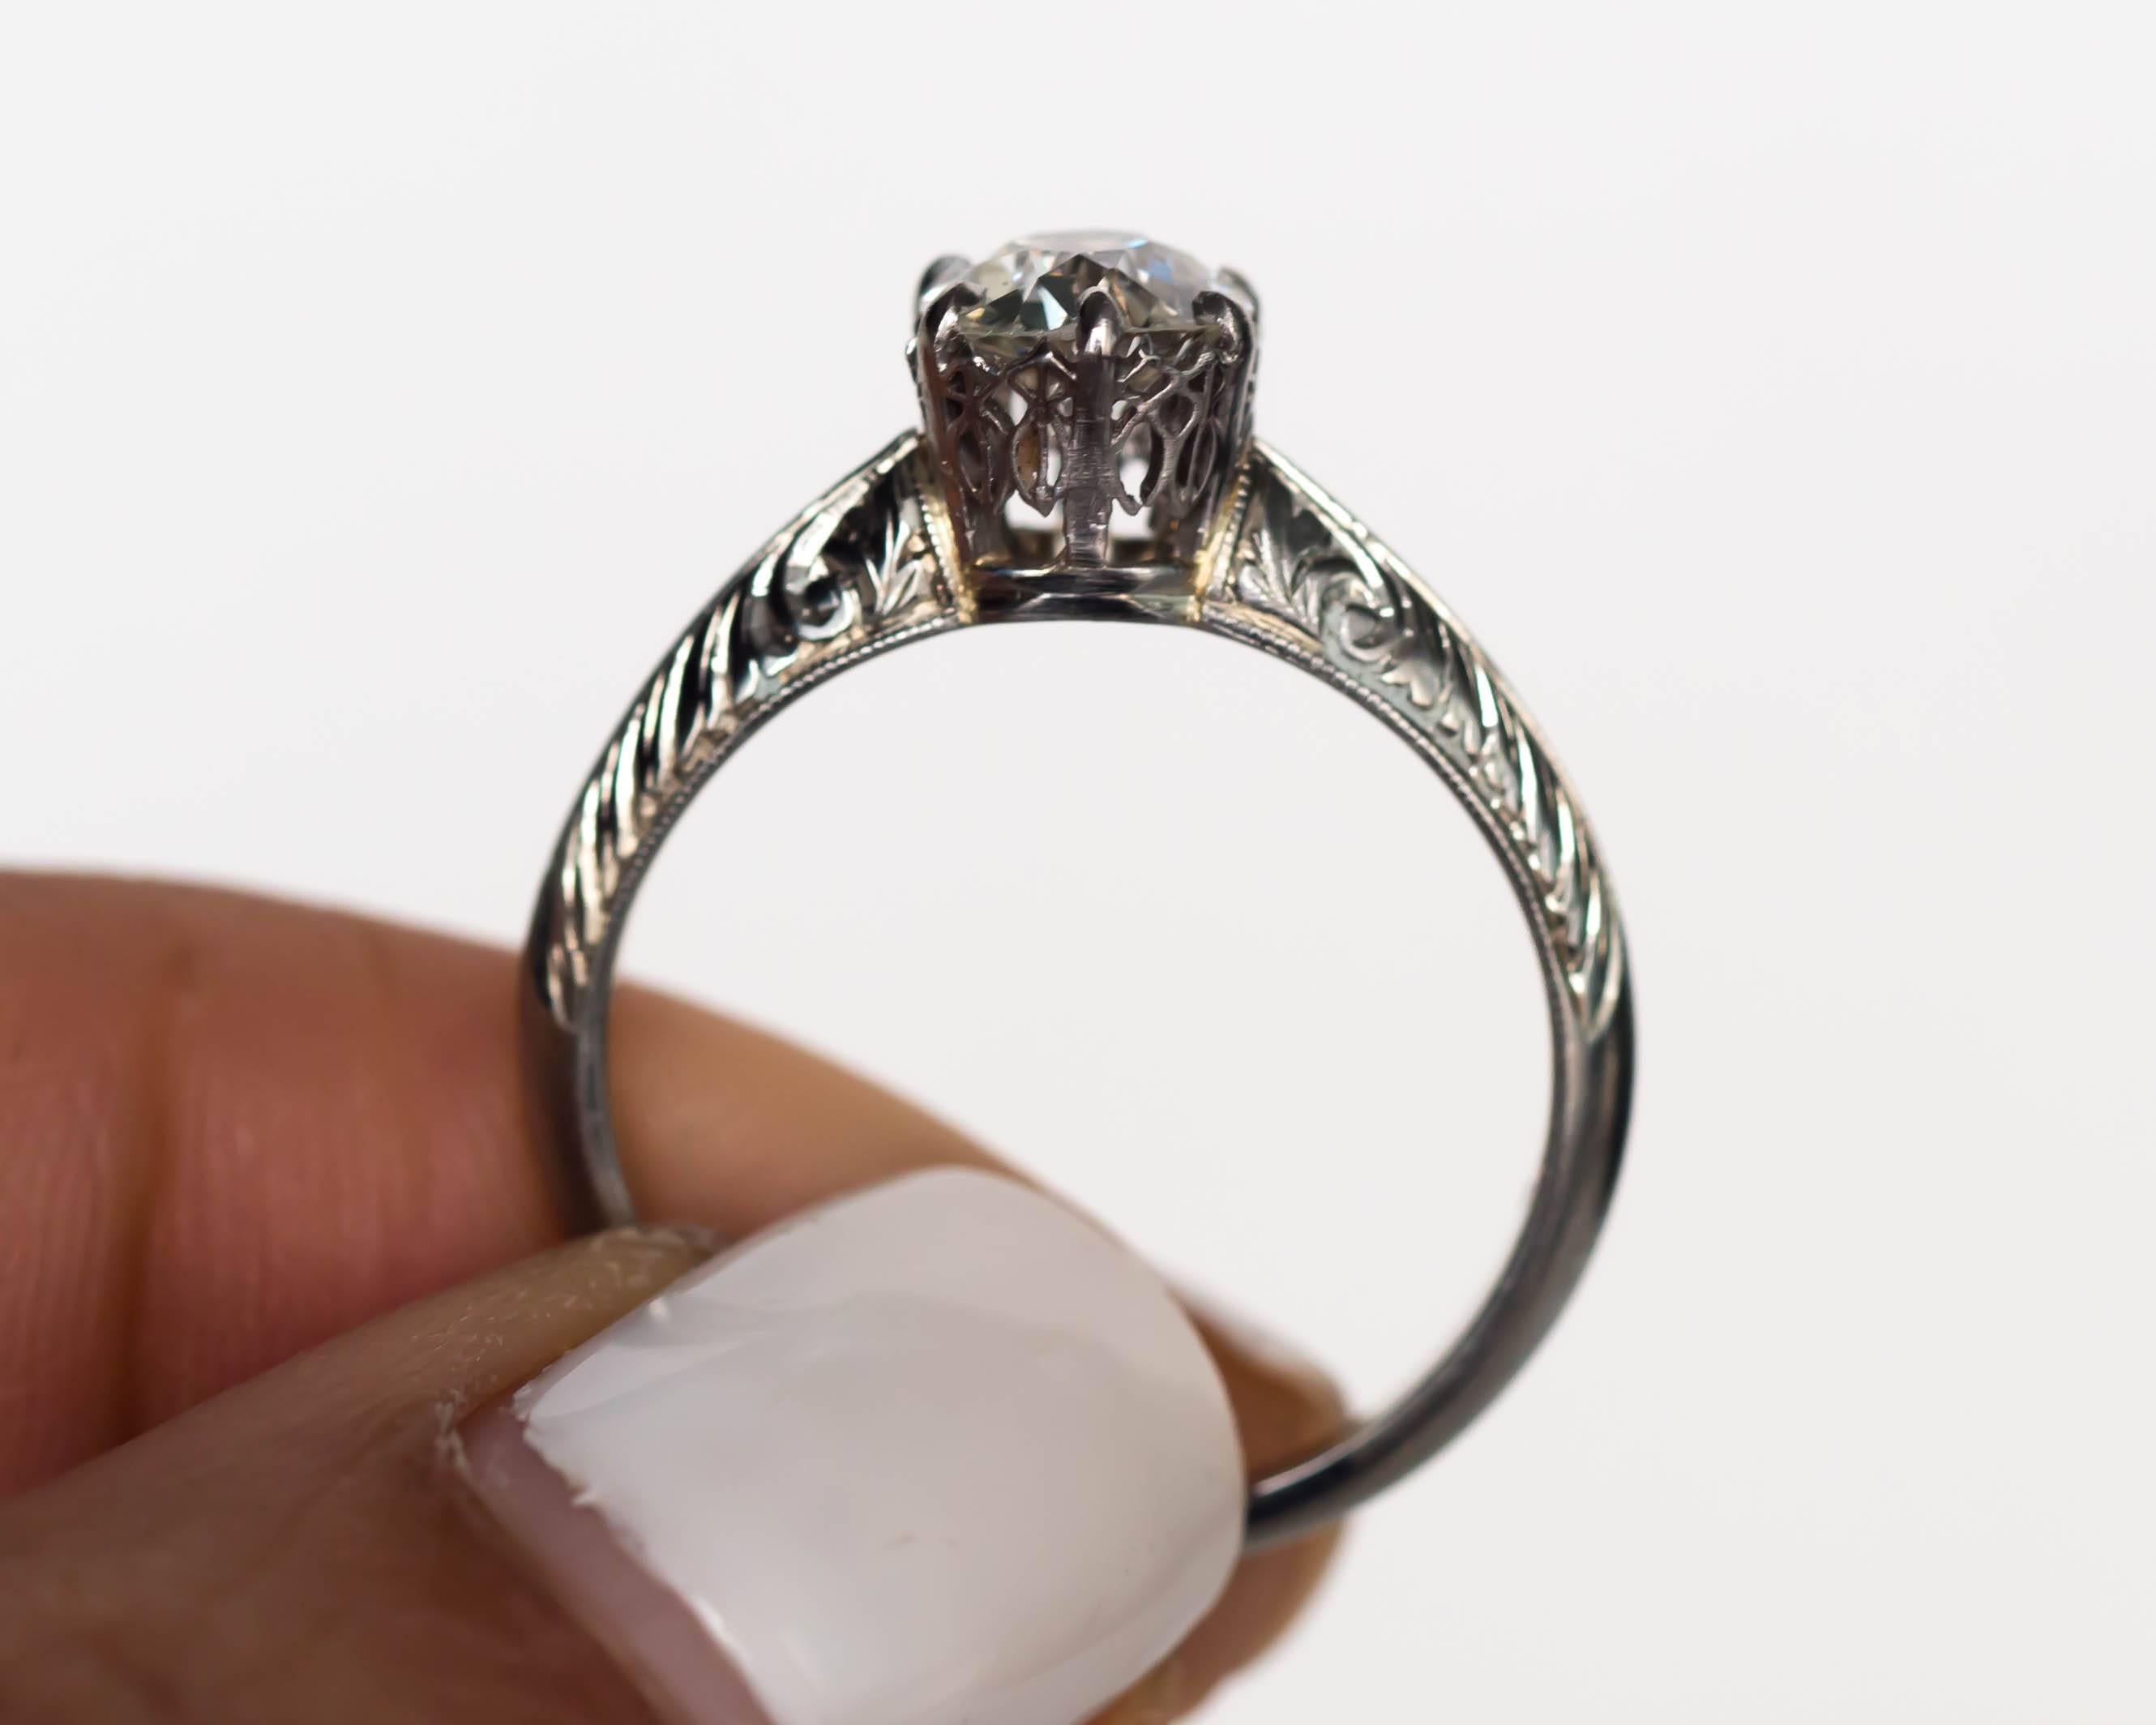 1910 Edwardian GIA Certified .74 Carat Diamond White Gold Engagement Ring In Excellent Condition For Sale In Atlanta, GA